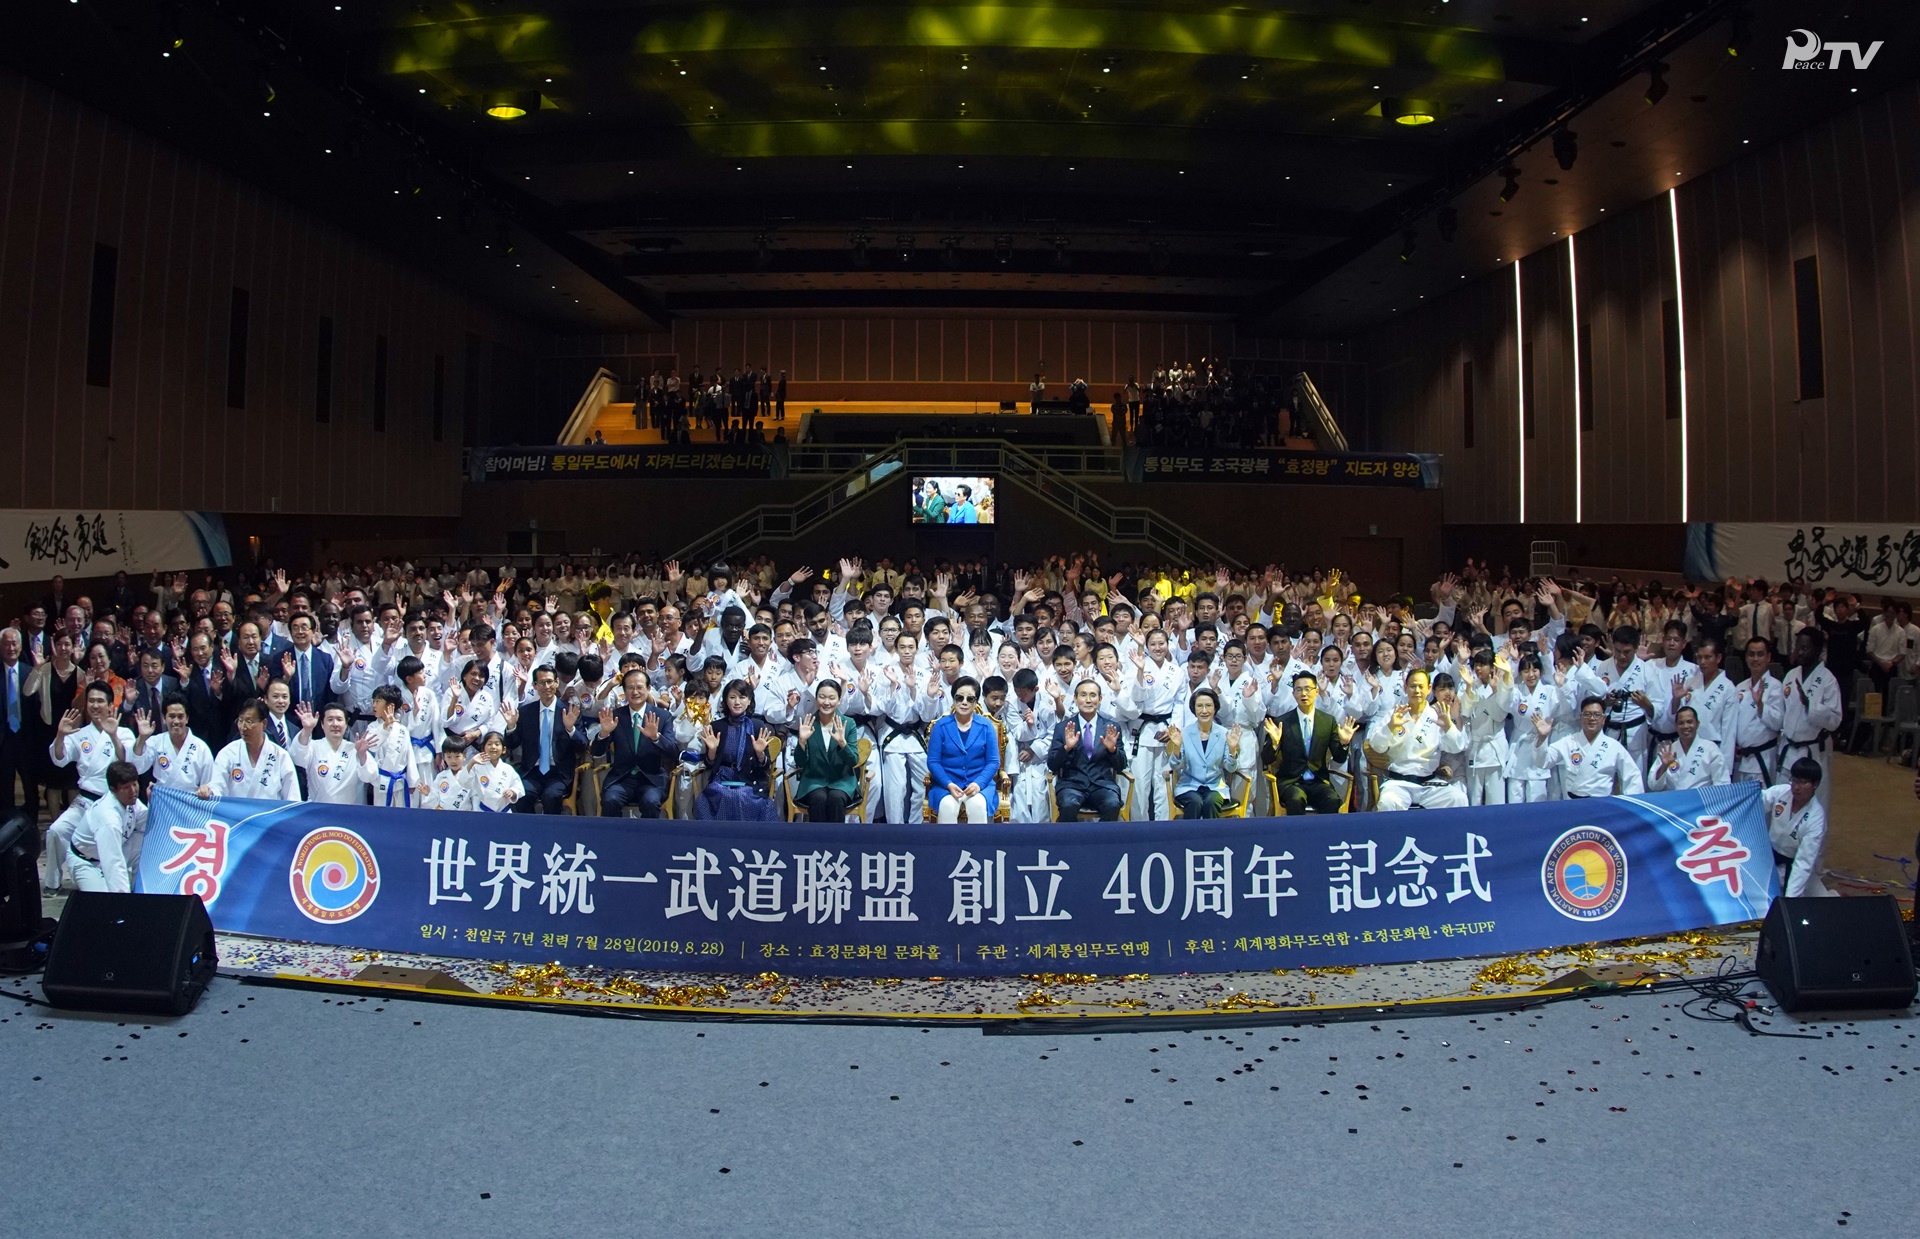 Celebration of the 40th Anniversary of World Tongil-Moo-Do Federation. (28th August 2019) Hyojeong Cultural Center